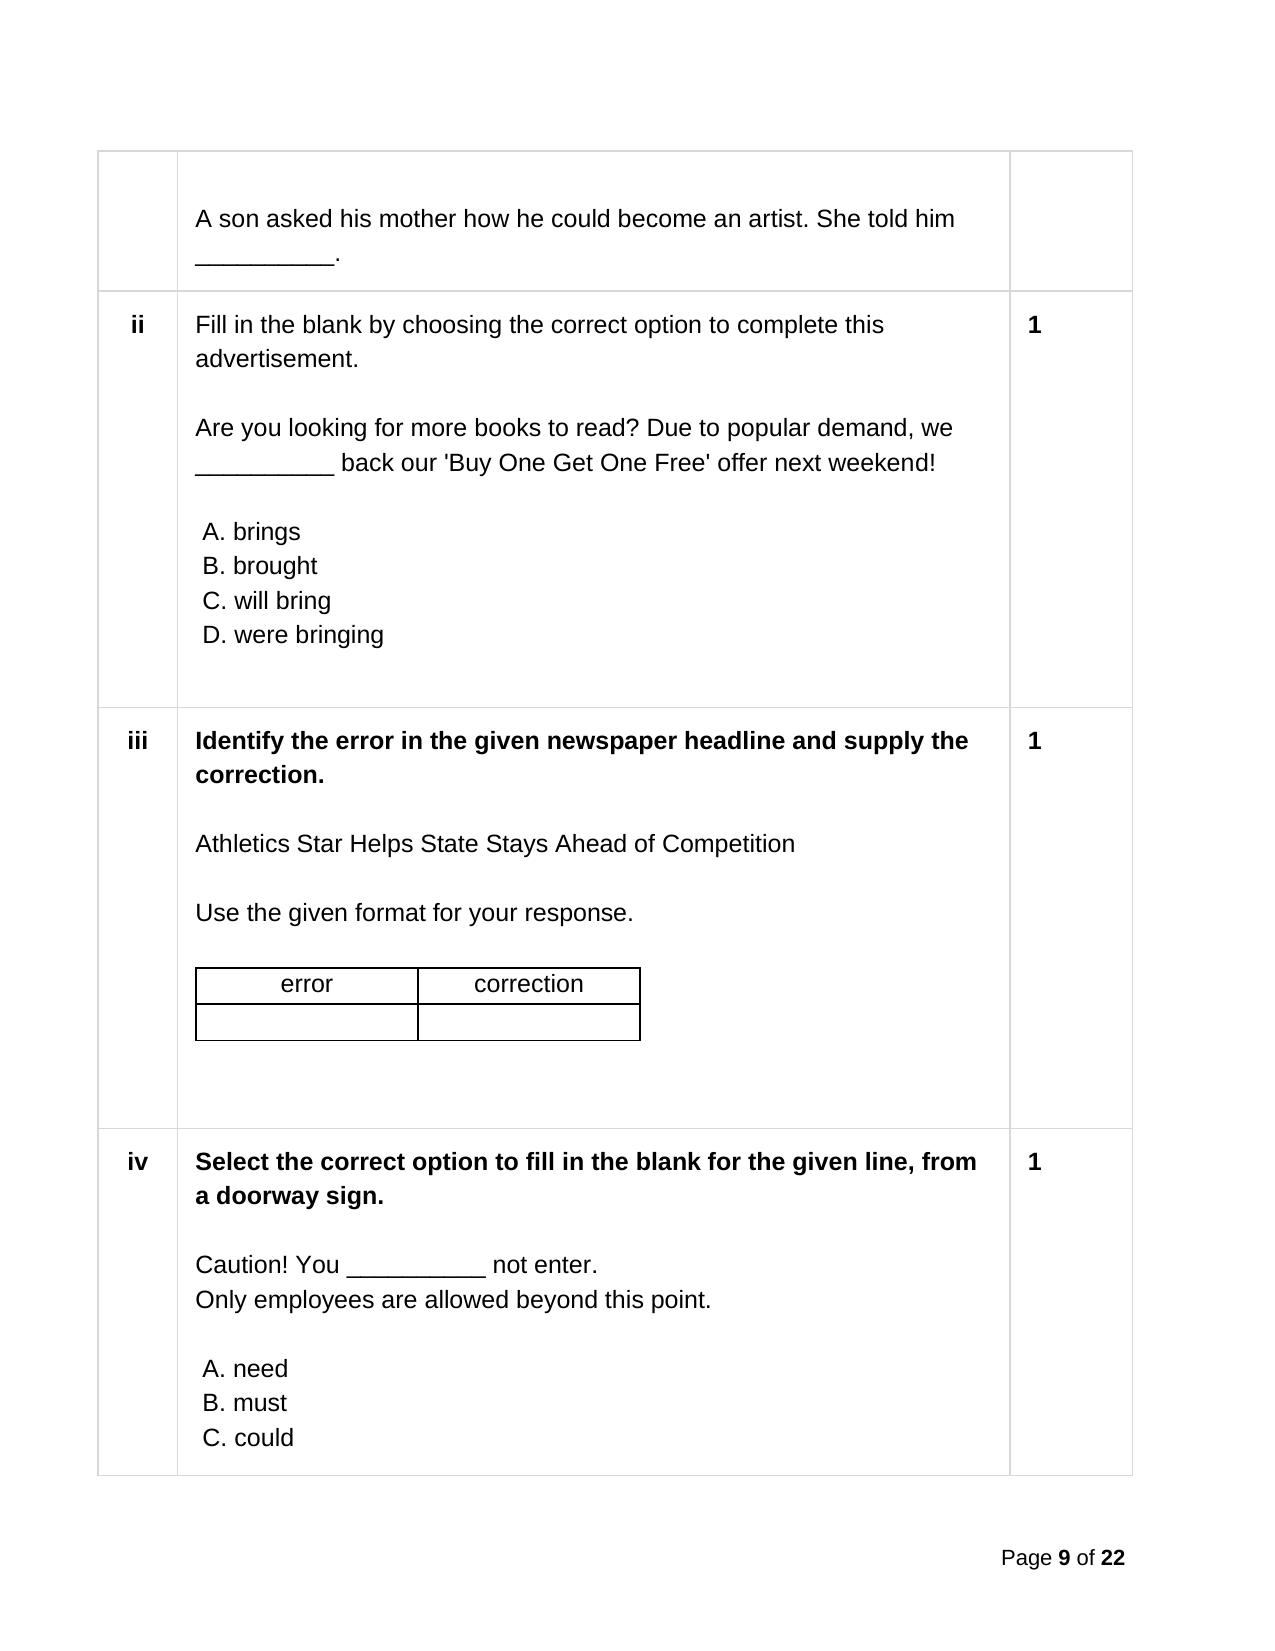 CBSE Class 10 English Practice Questions 2022-23 - Page 9